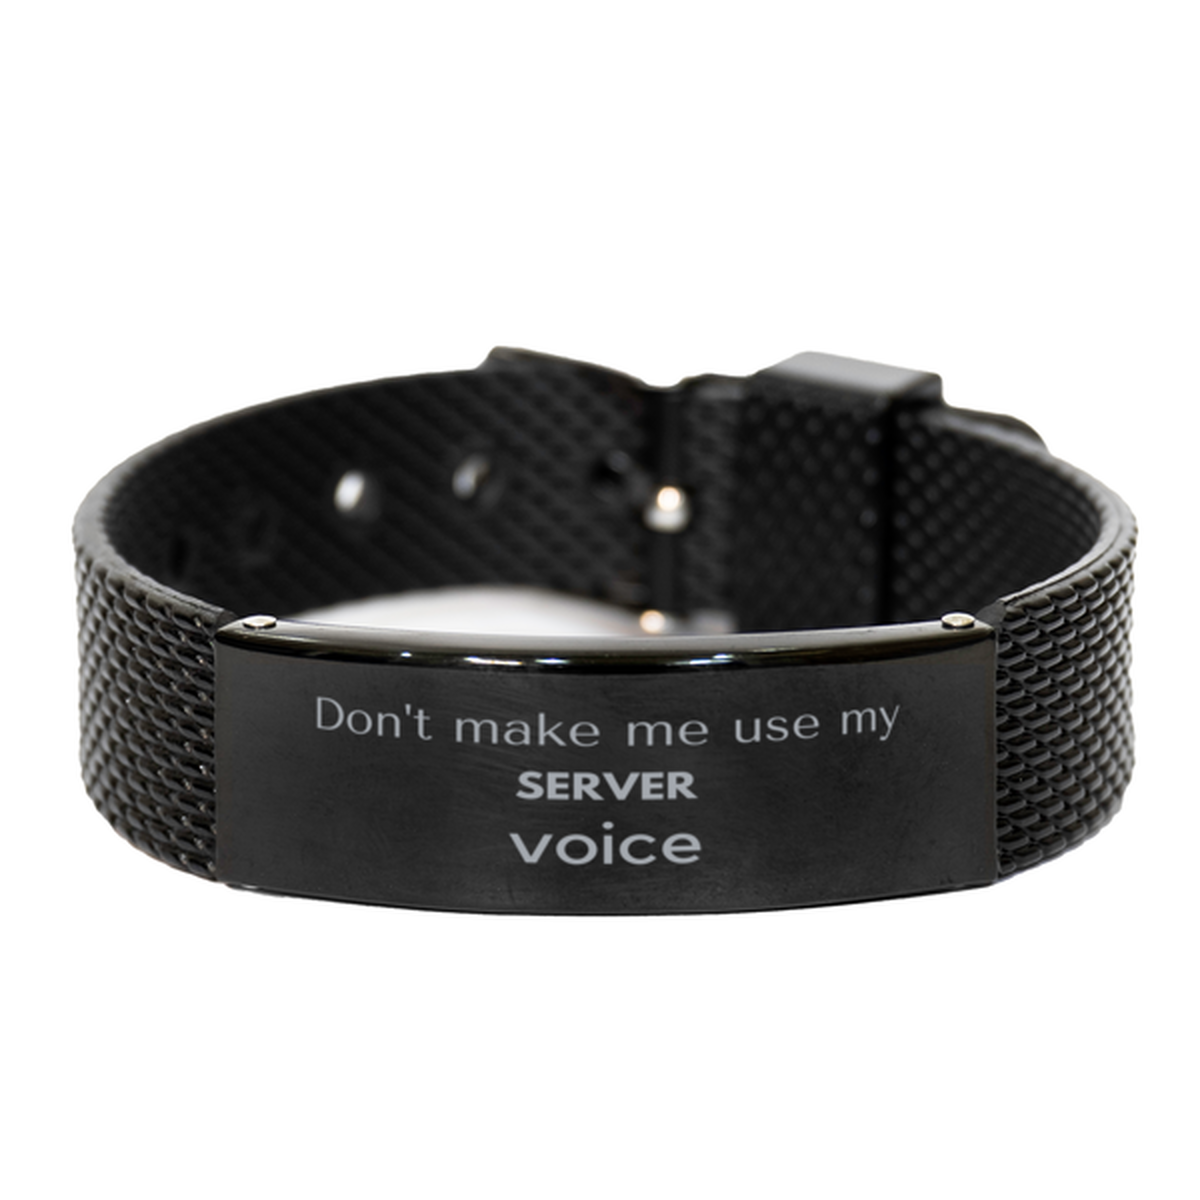 Don't make me use my Server voice, Sarcasm Server Gifts, Christmas Server Black Shark Mesh Bracelet Birthday Unique Gifts For Server Coworkers, Men, Women, Colleague, Friends